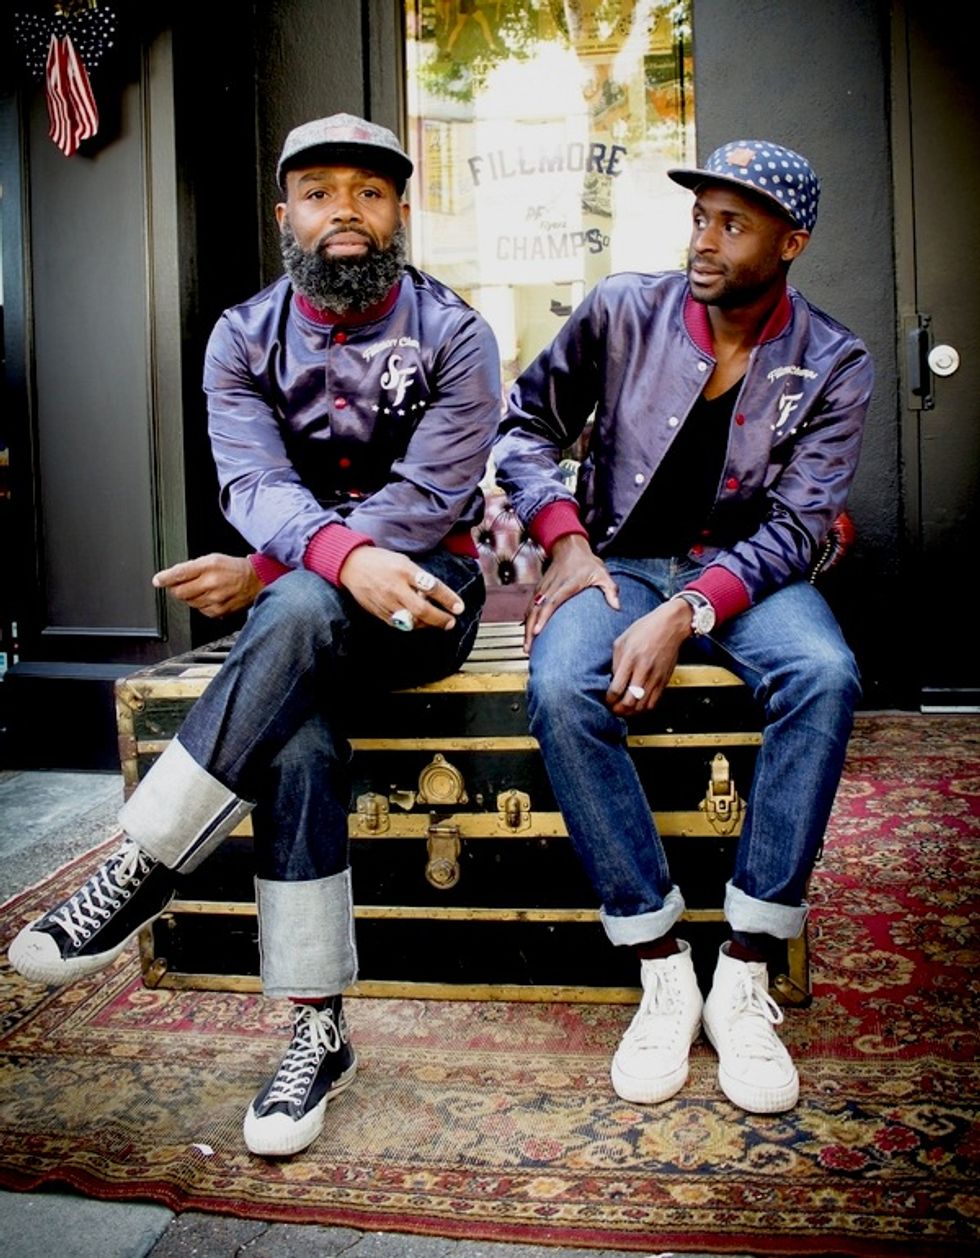 Street Style Report: Brooklyn Circus Boys at The Fillmore Jazz Festival